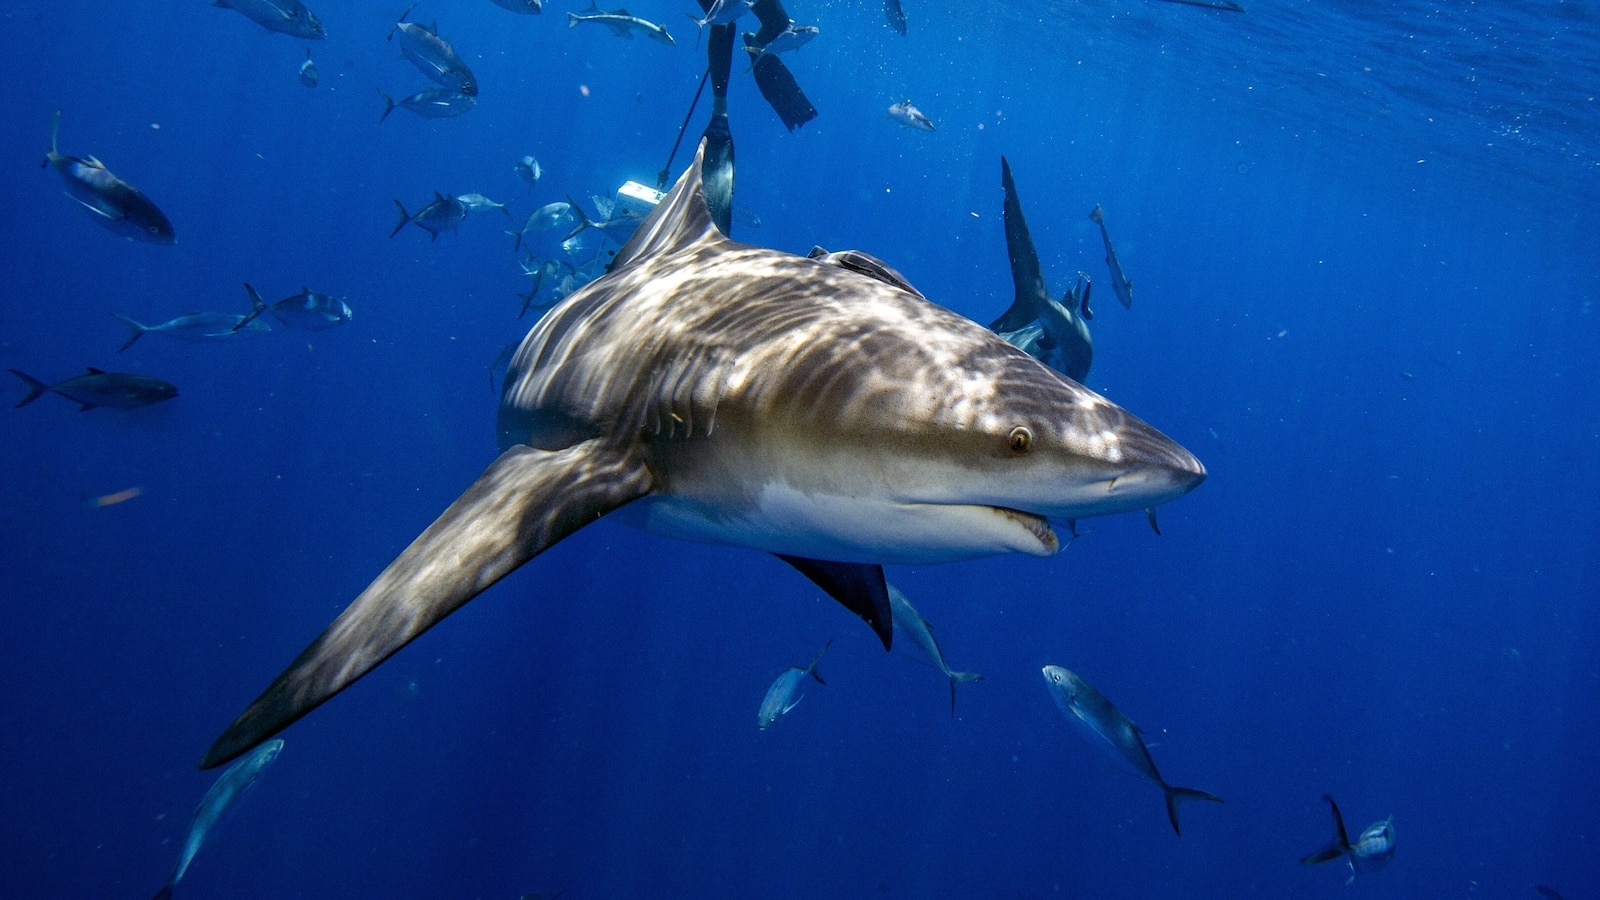 Warmer sea surface temperatures have led to a bull shark population increase, scientists say [Video]